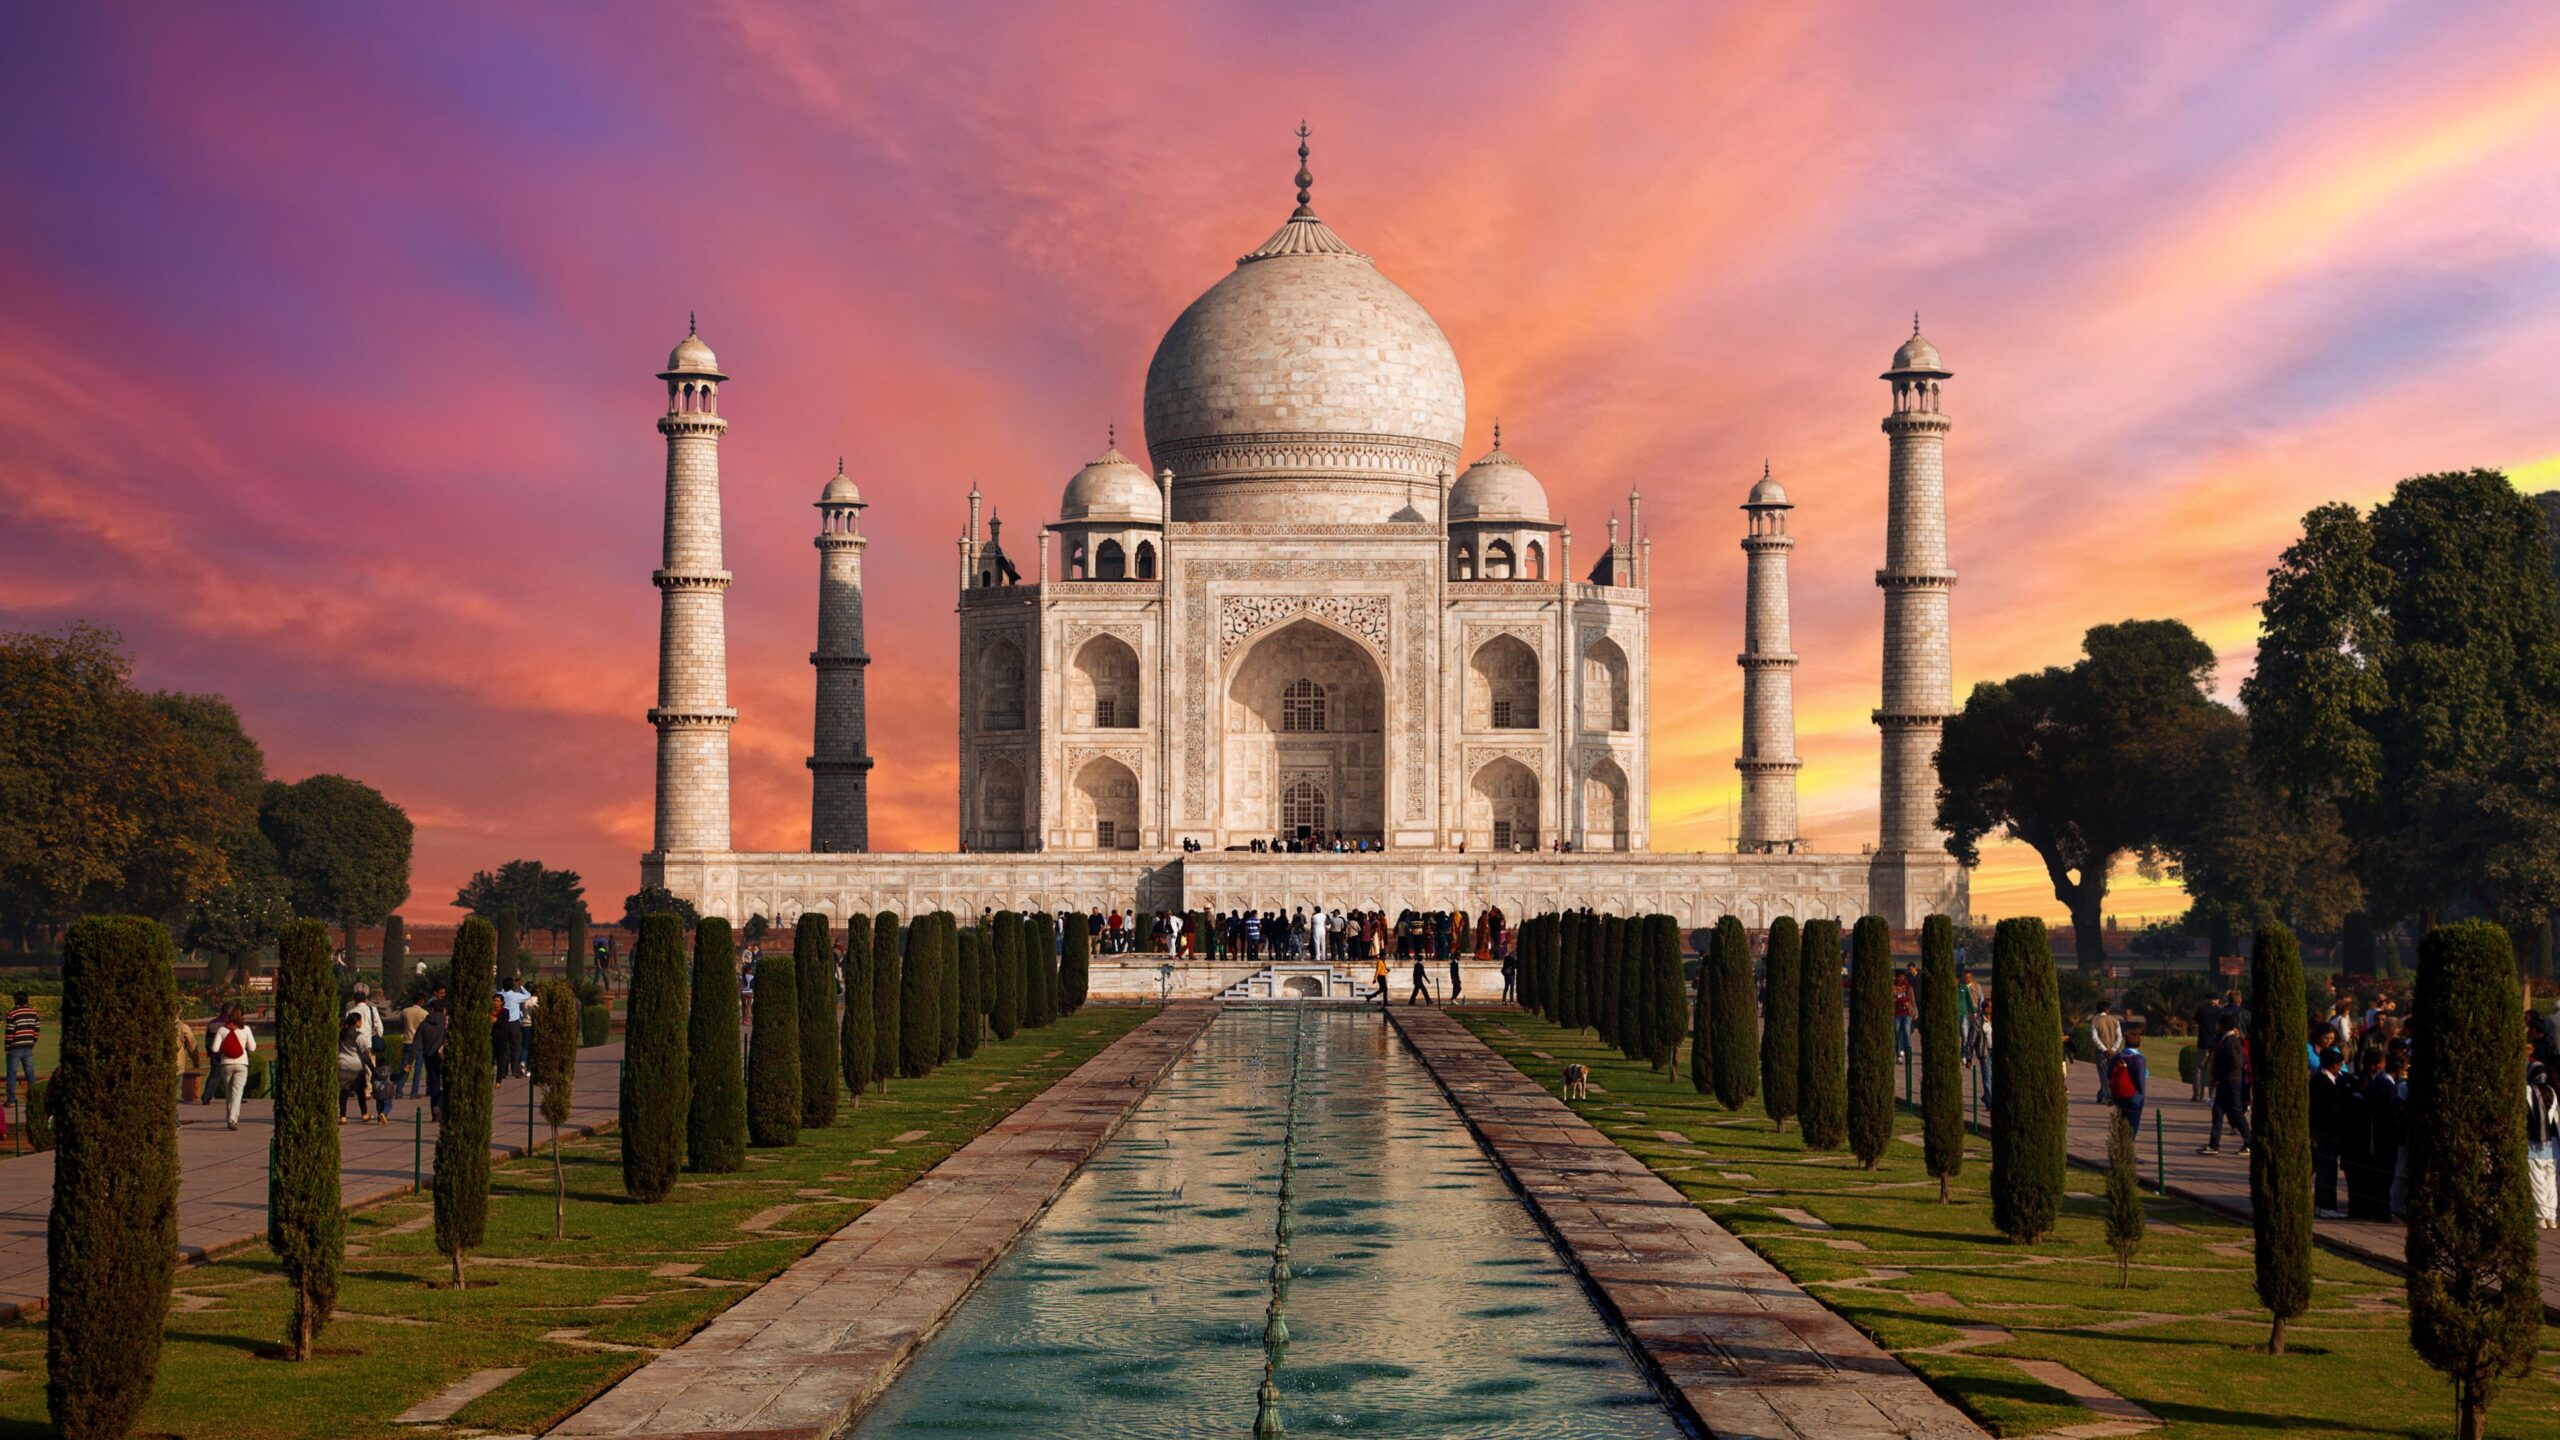 The Taj Mahal : One Of The Seven Wonders Of The World